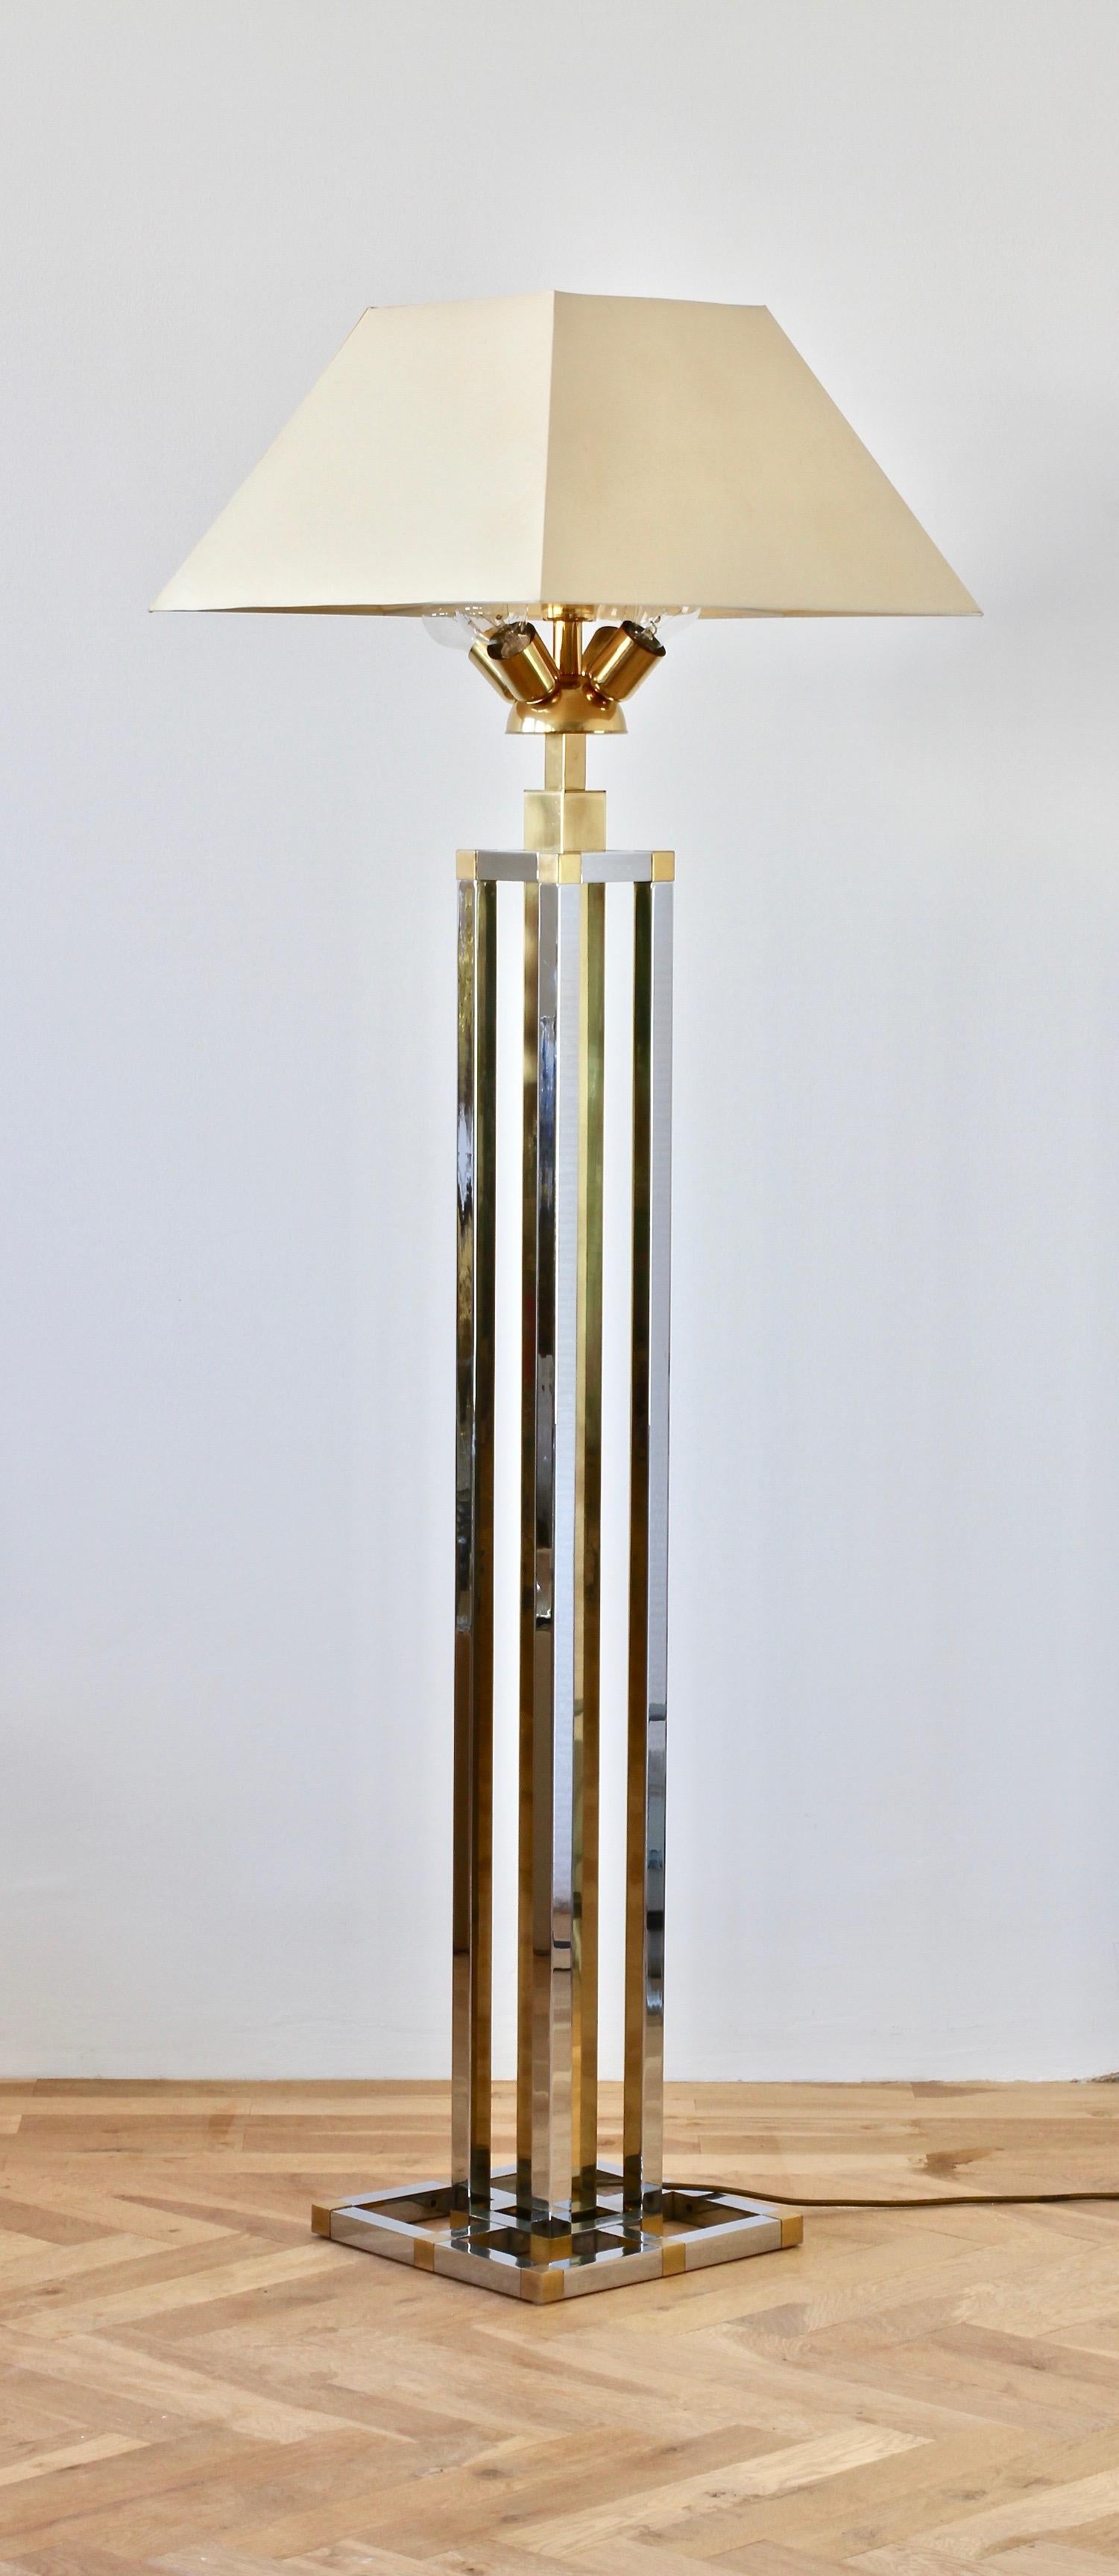 Mid-Century Modern vintage Italian floor lamp, made in Italy, circa late 1970s -early 1980s. Featuring chrome, polished brass and plated/gilt brass - this piece lends itself to any modern home decor as well as the Mid-Century Modern or Hollywood